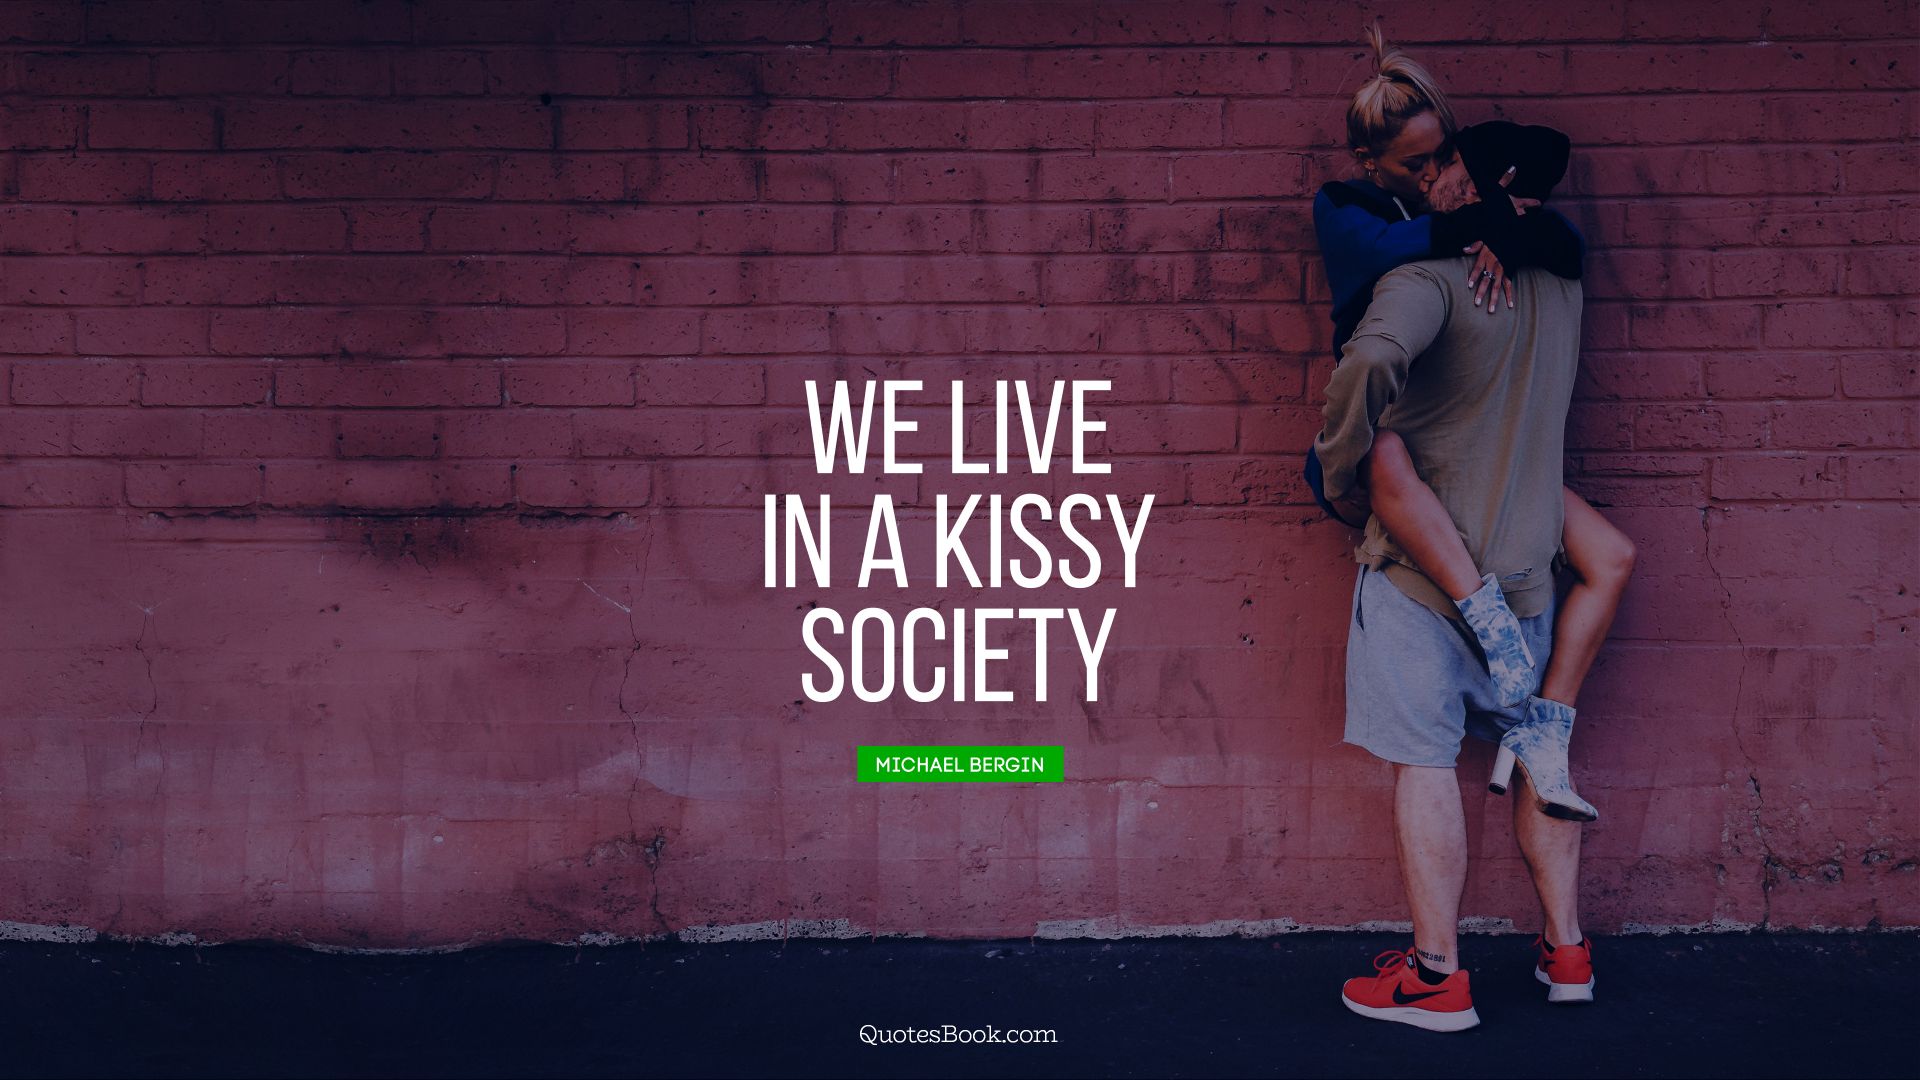 We live in a kissy society. - Quote by Michael Bergin